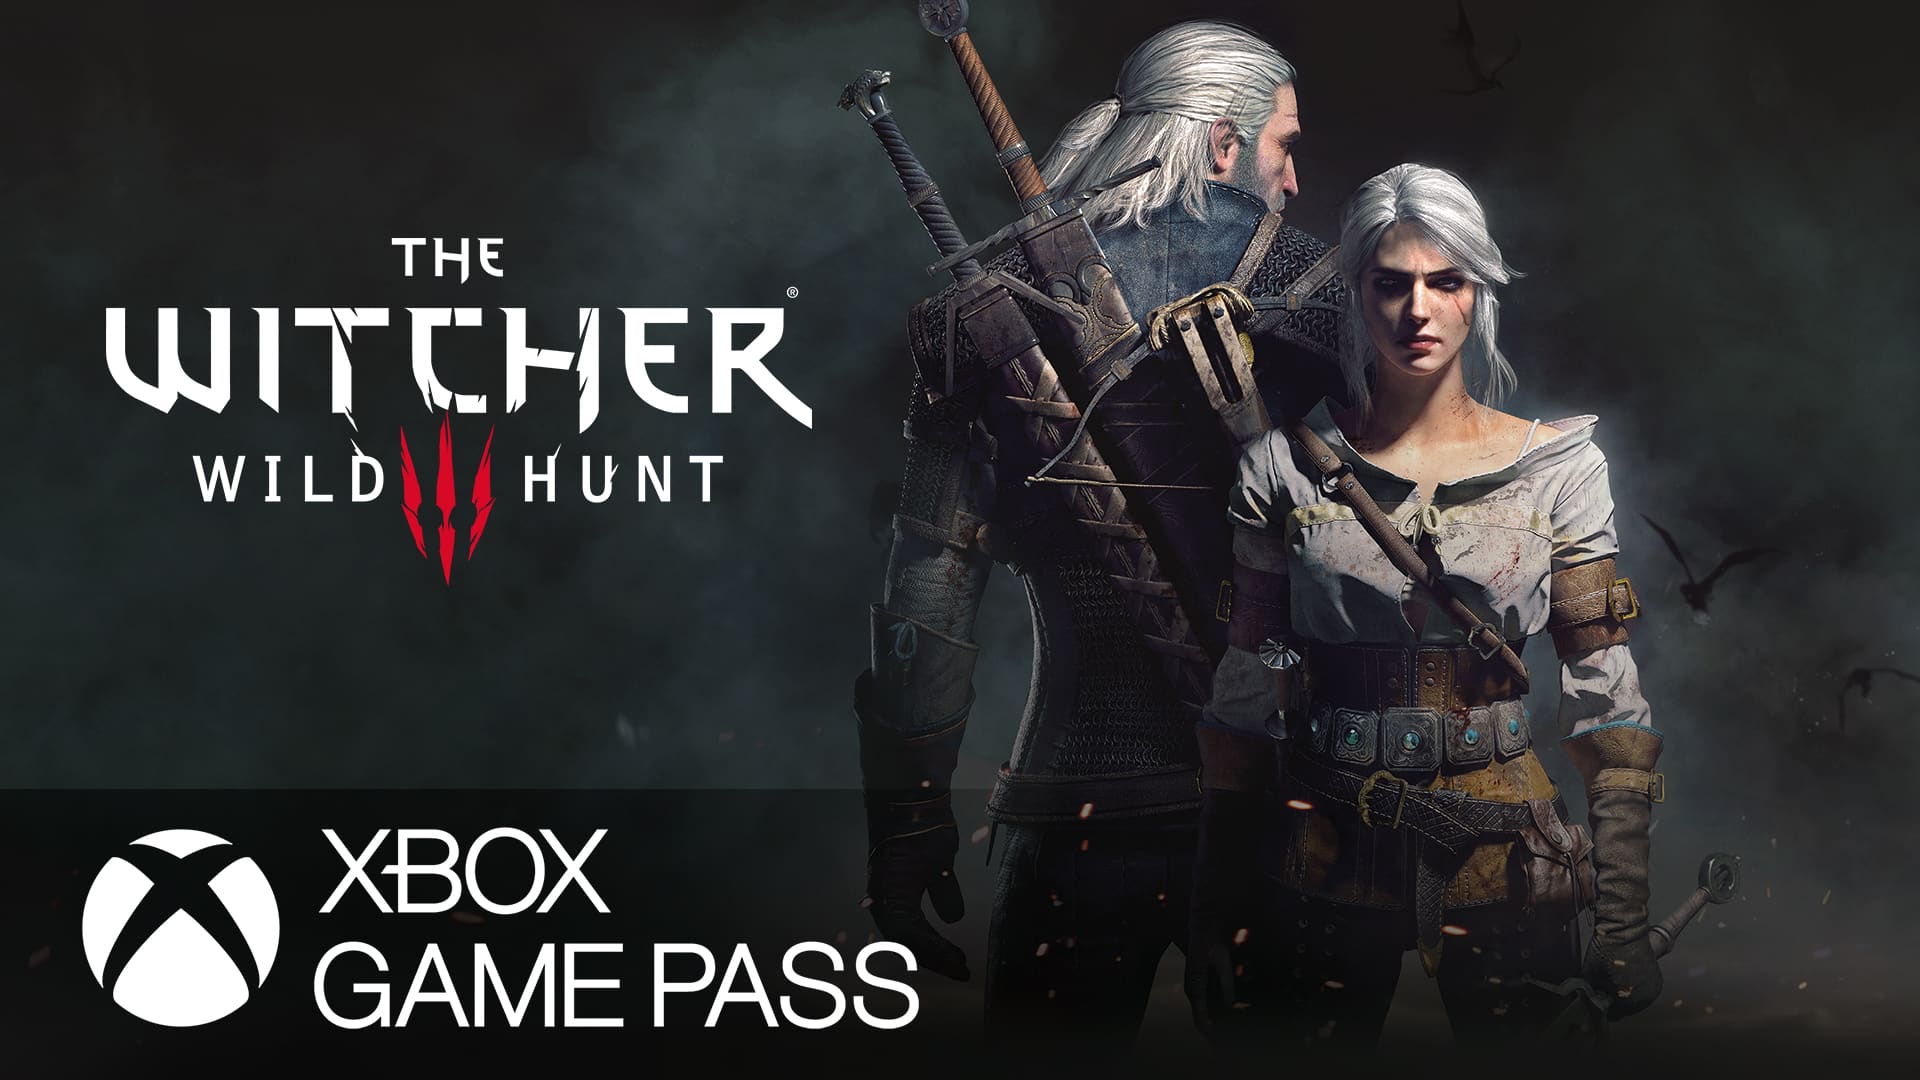 The Witcher 3 Xbox Game Pass